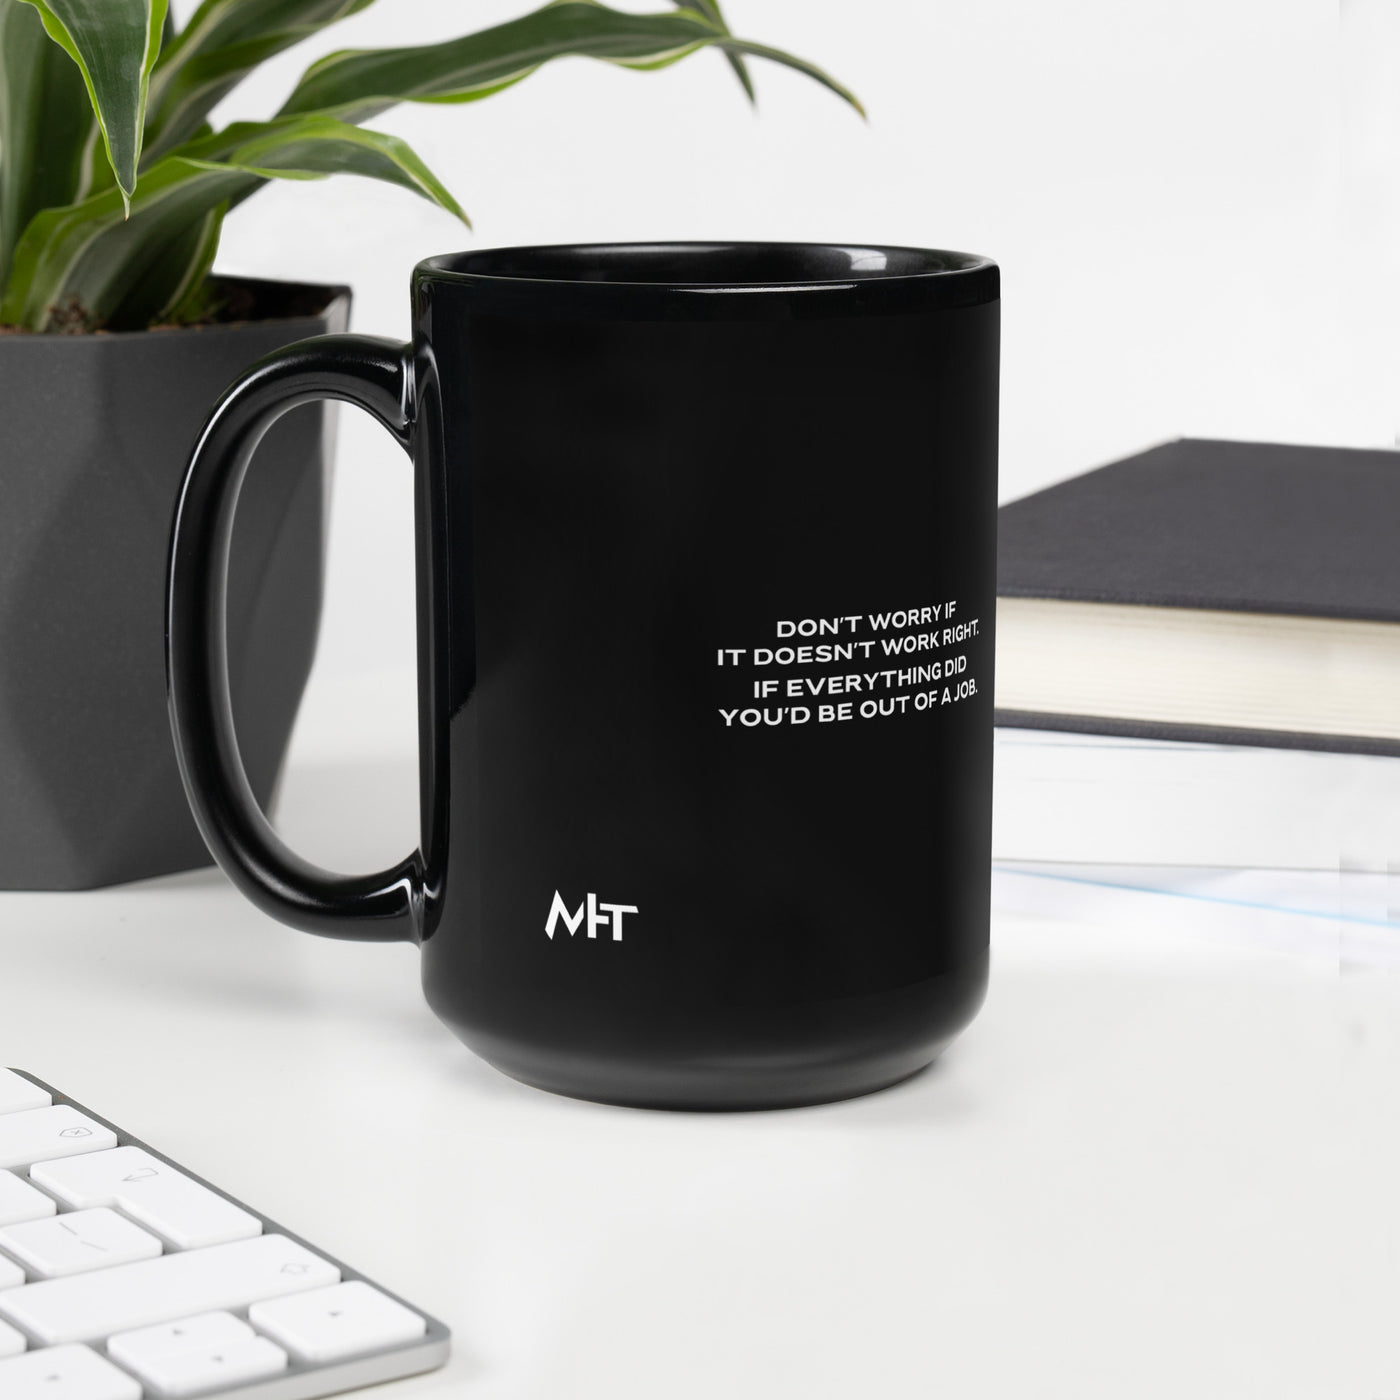 Don't worry if it doesn't work right: if everything did, you would be out of your job V1 - Black Glossy Mug